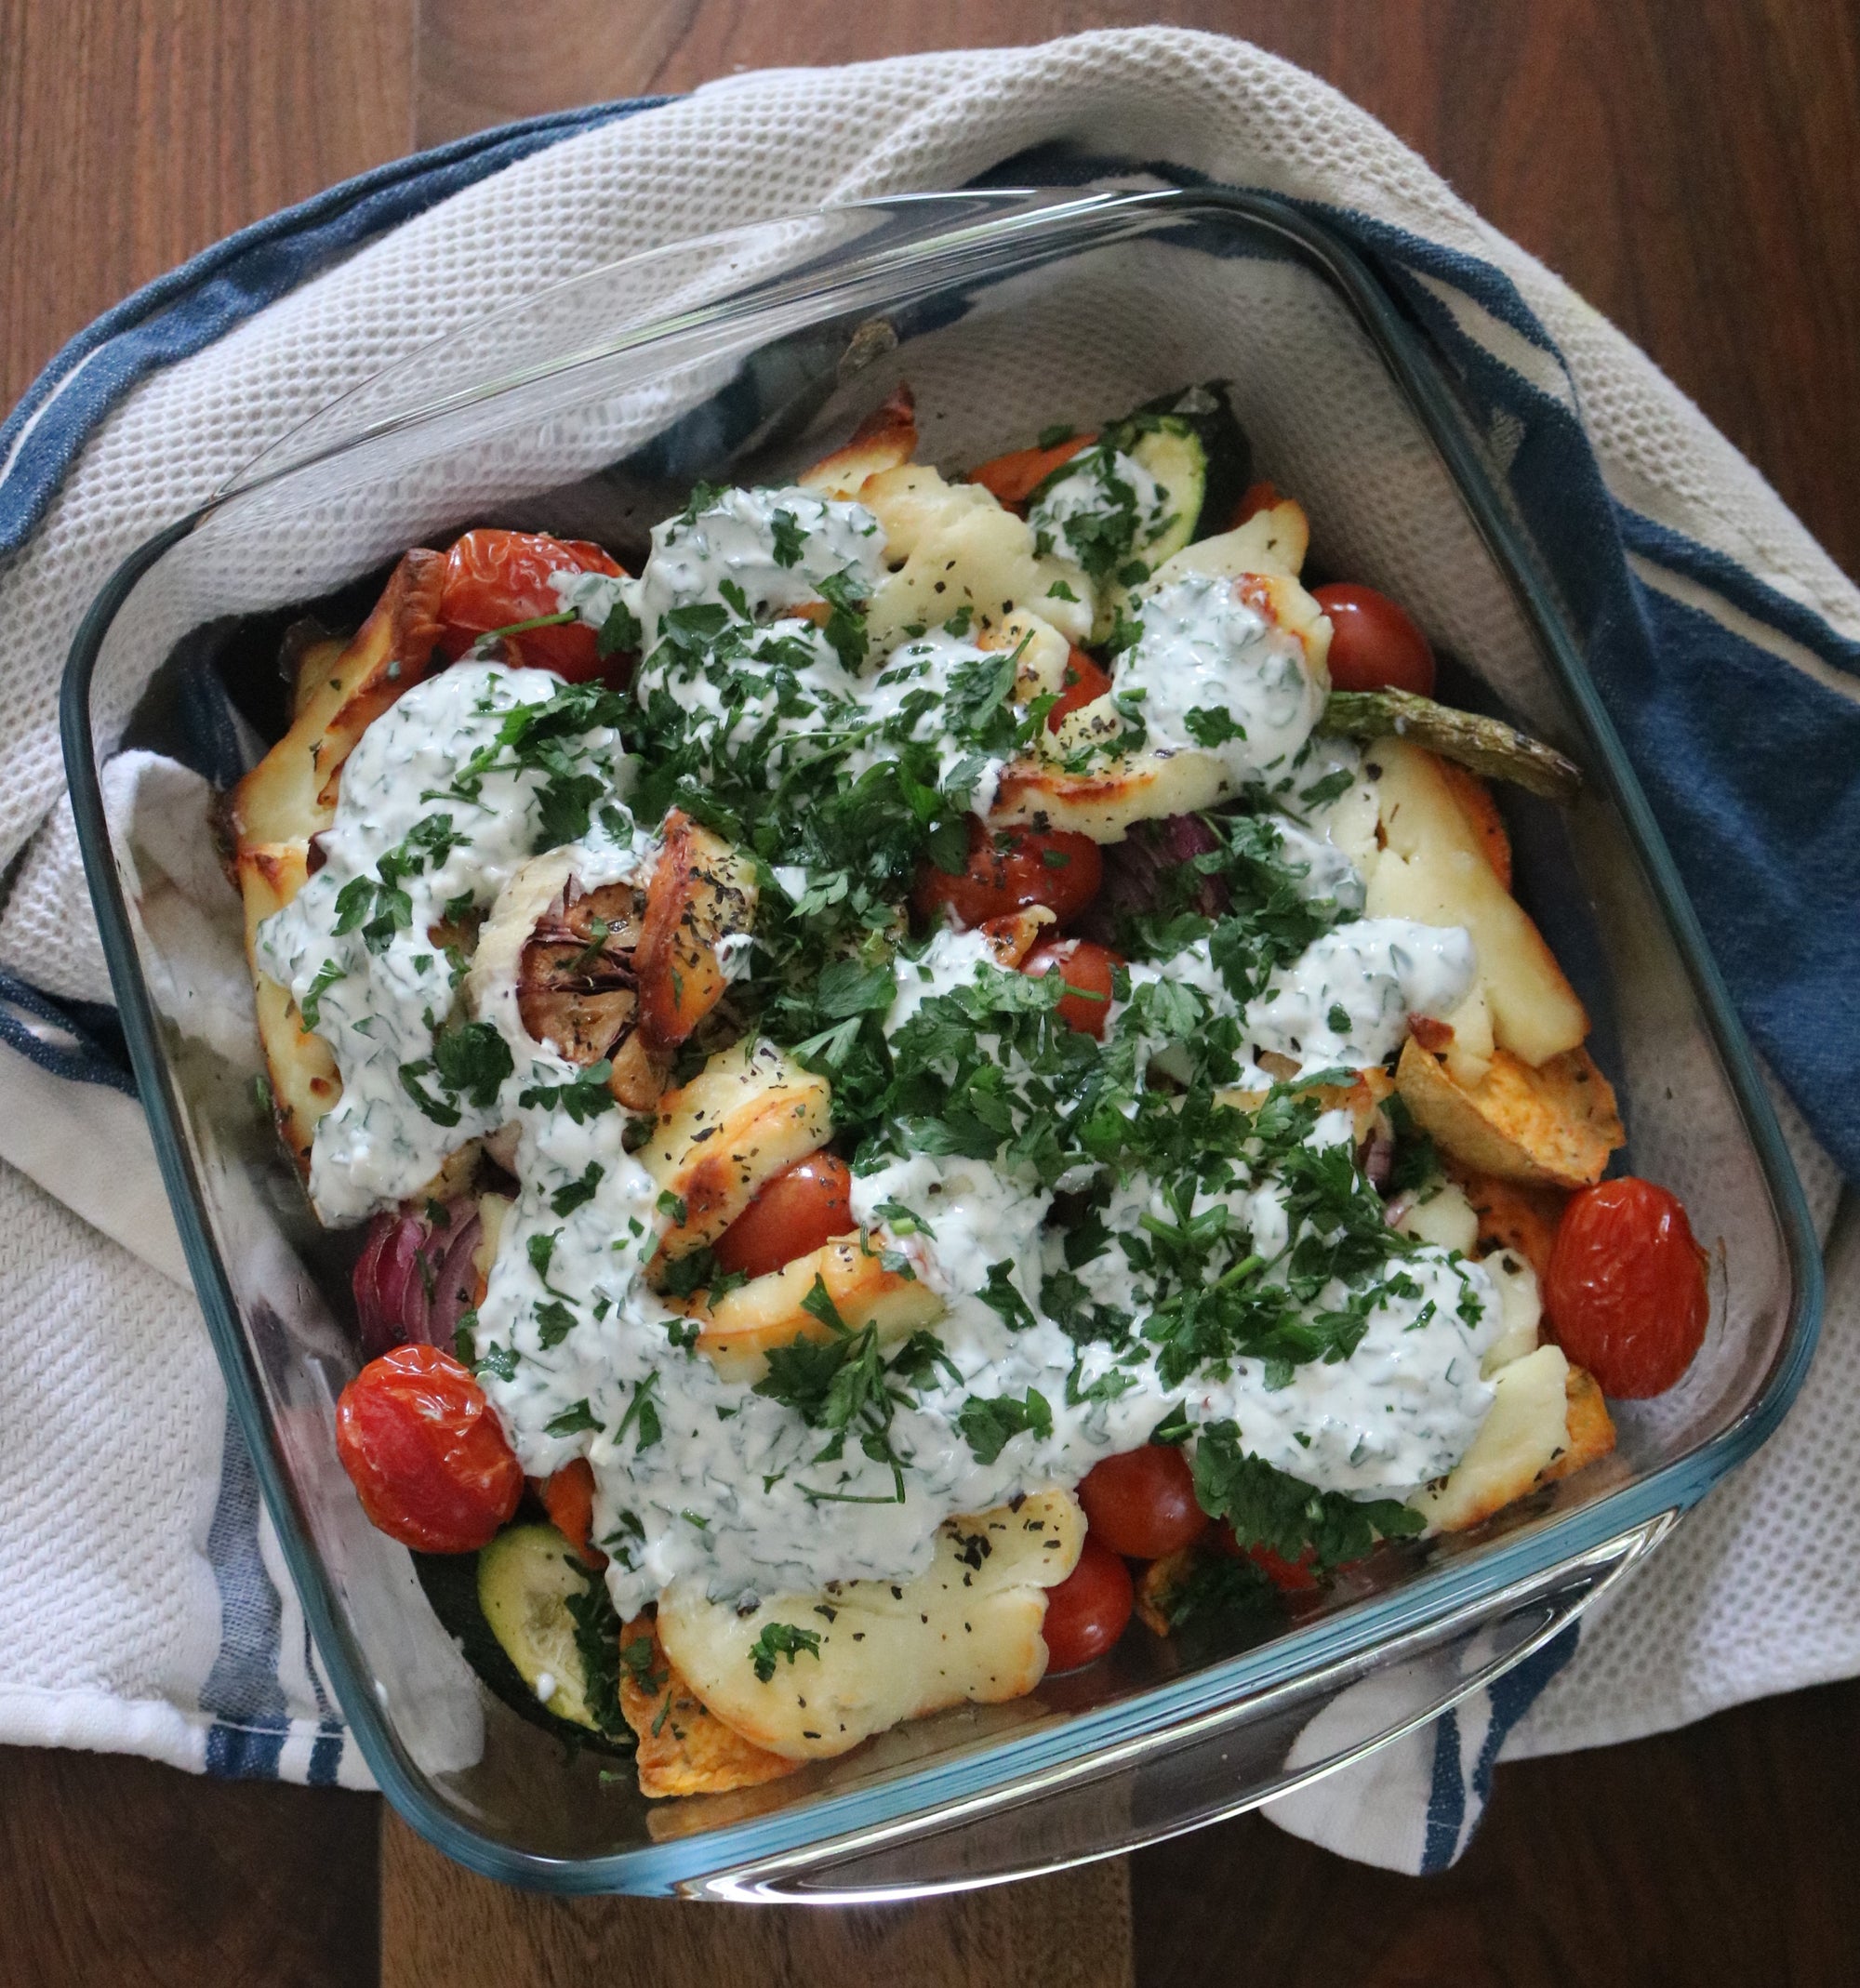 Roasted Halloumi and Vegetables with Parsley Yoghurt dressing